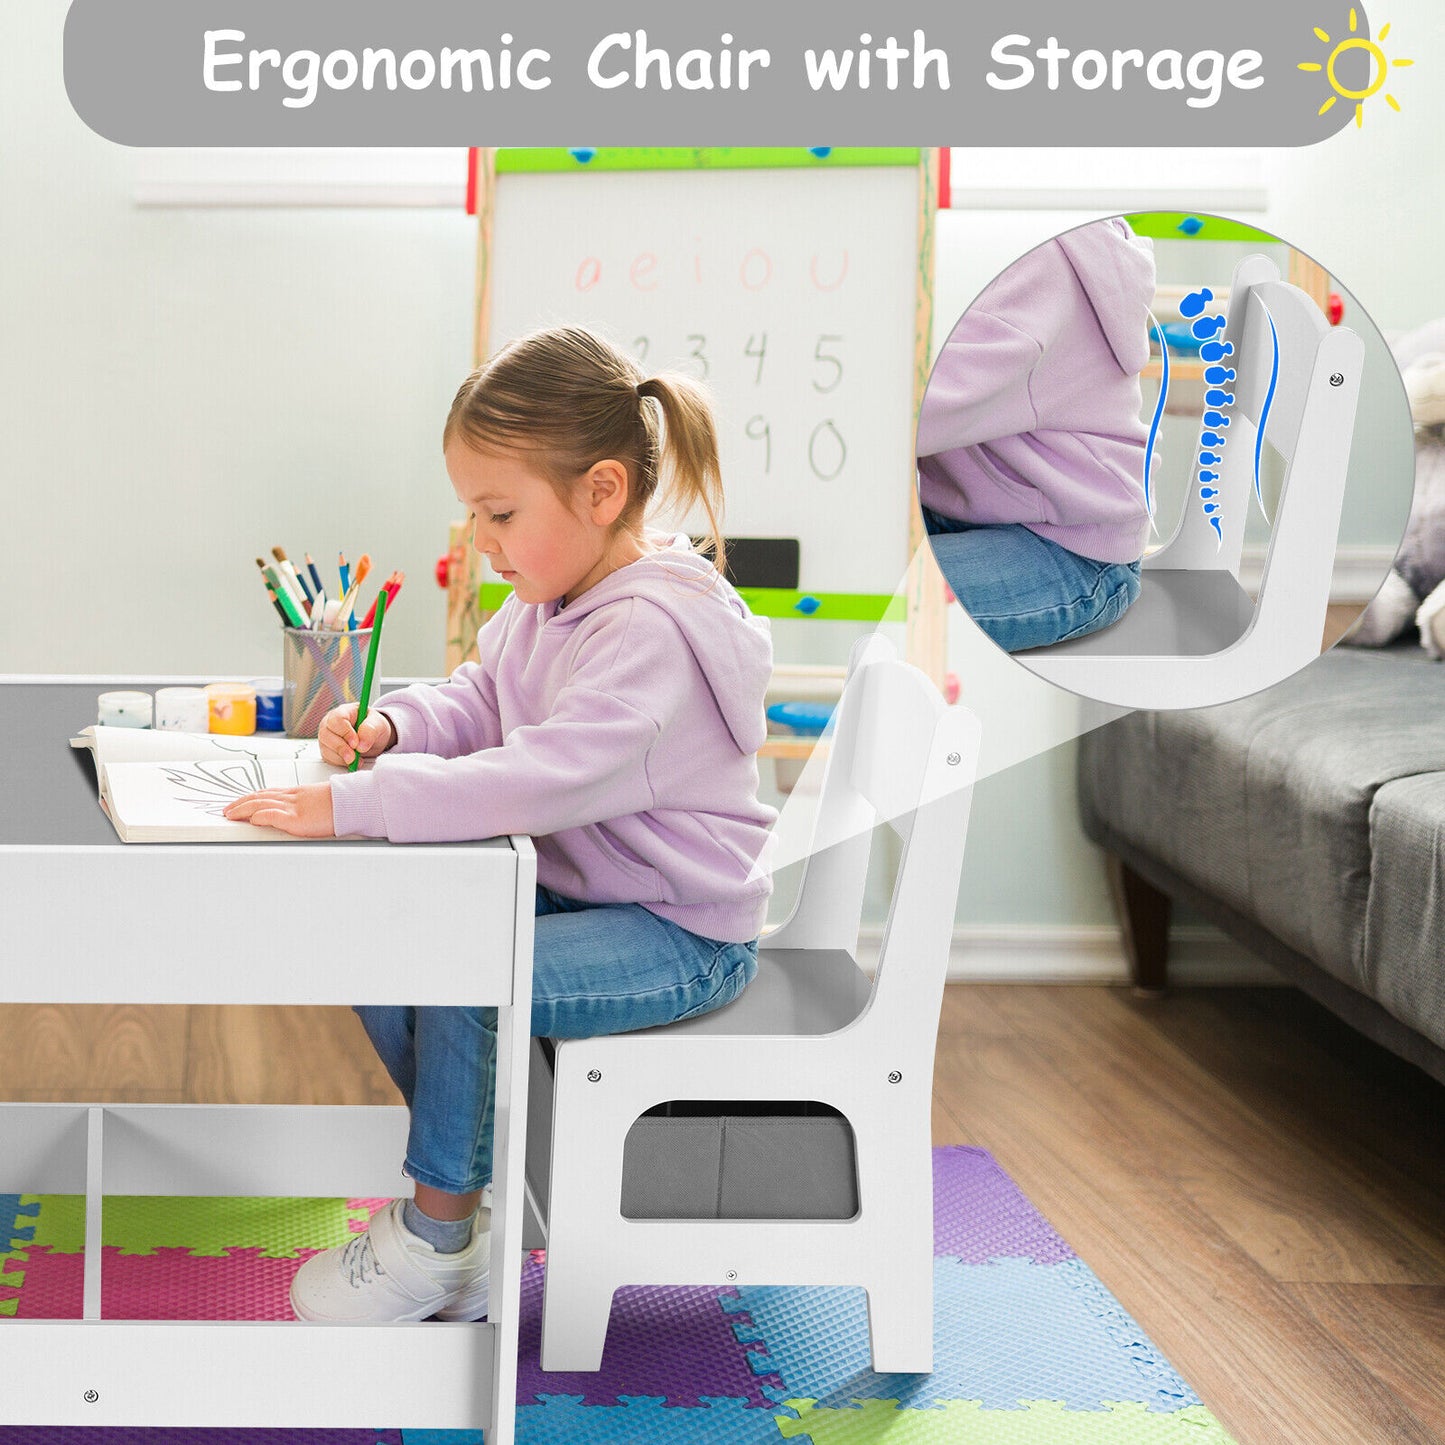 Arlopu Kids Table and 2 Chairs Set with Storage Drawer Children Writing Reading Table for Toddlers 2-8 Years